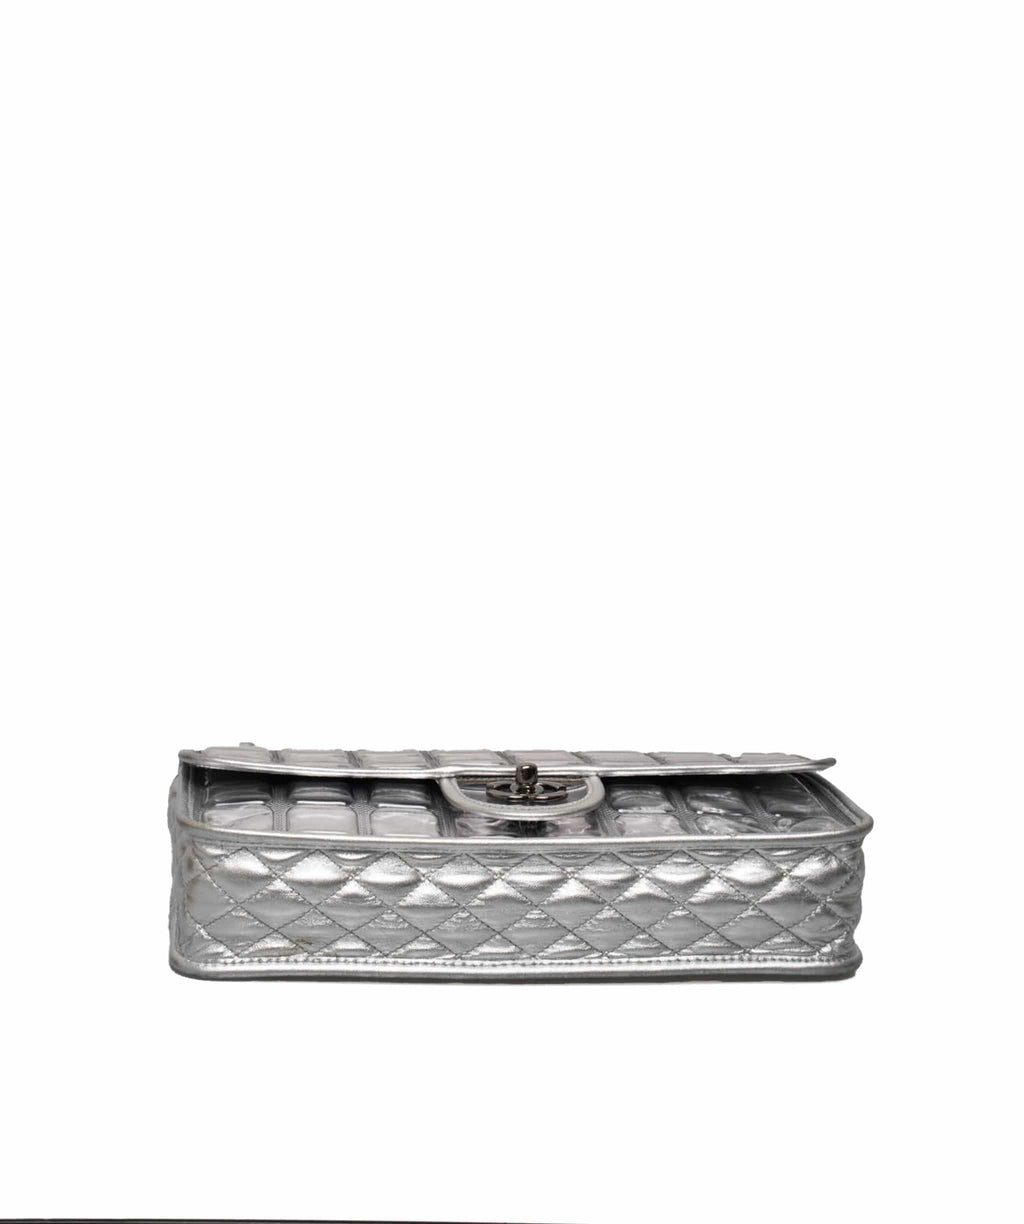 Chanel Vinyl Ice Cube Flap Bag Metallic Silver Silver Hardware – Coco  Approved Studio